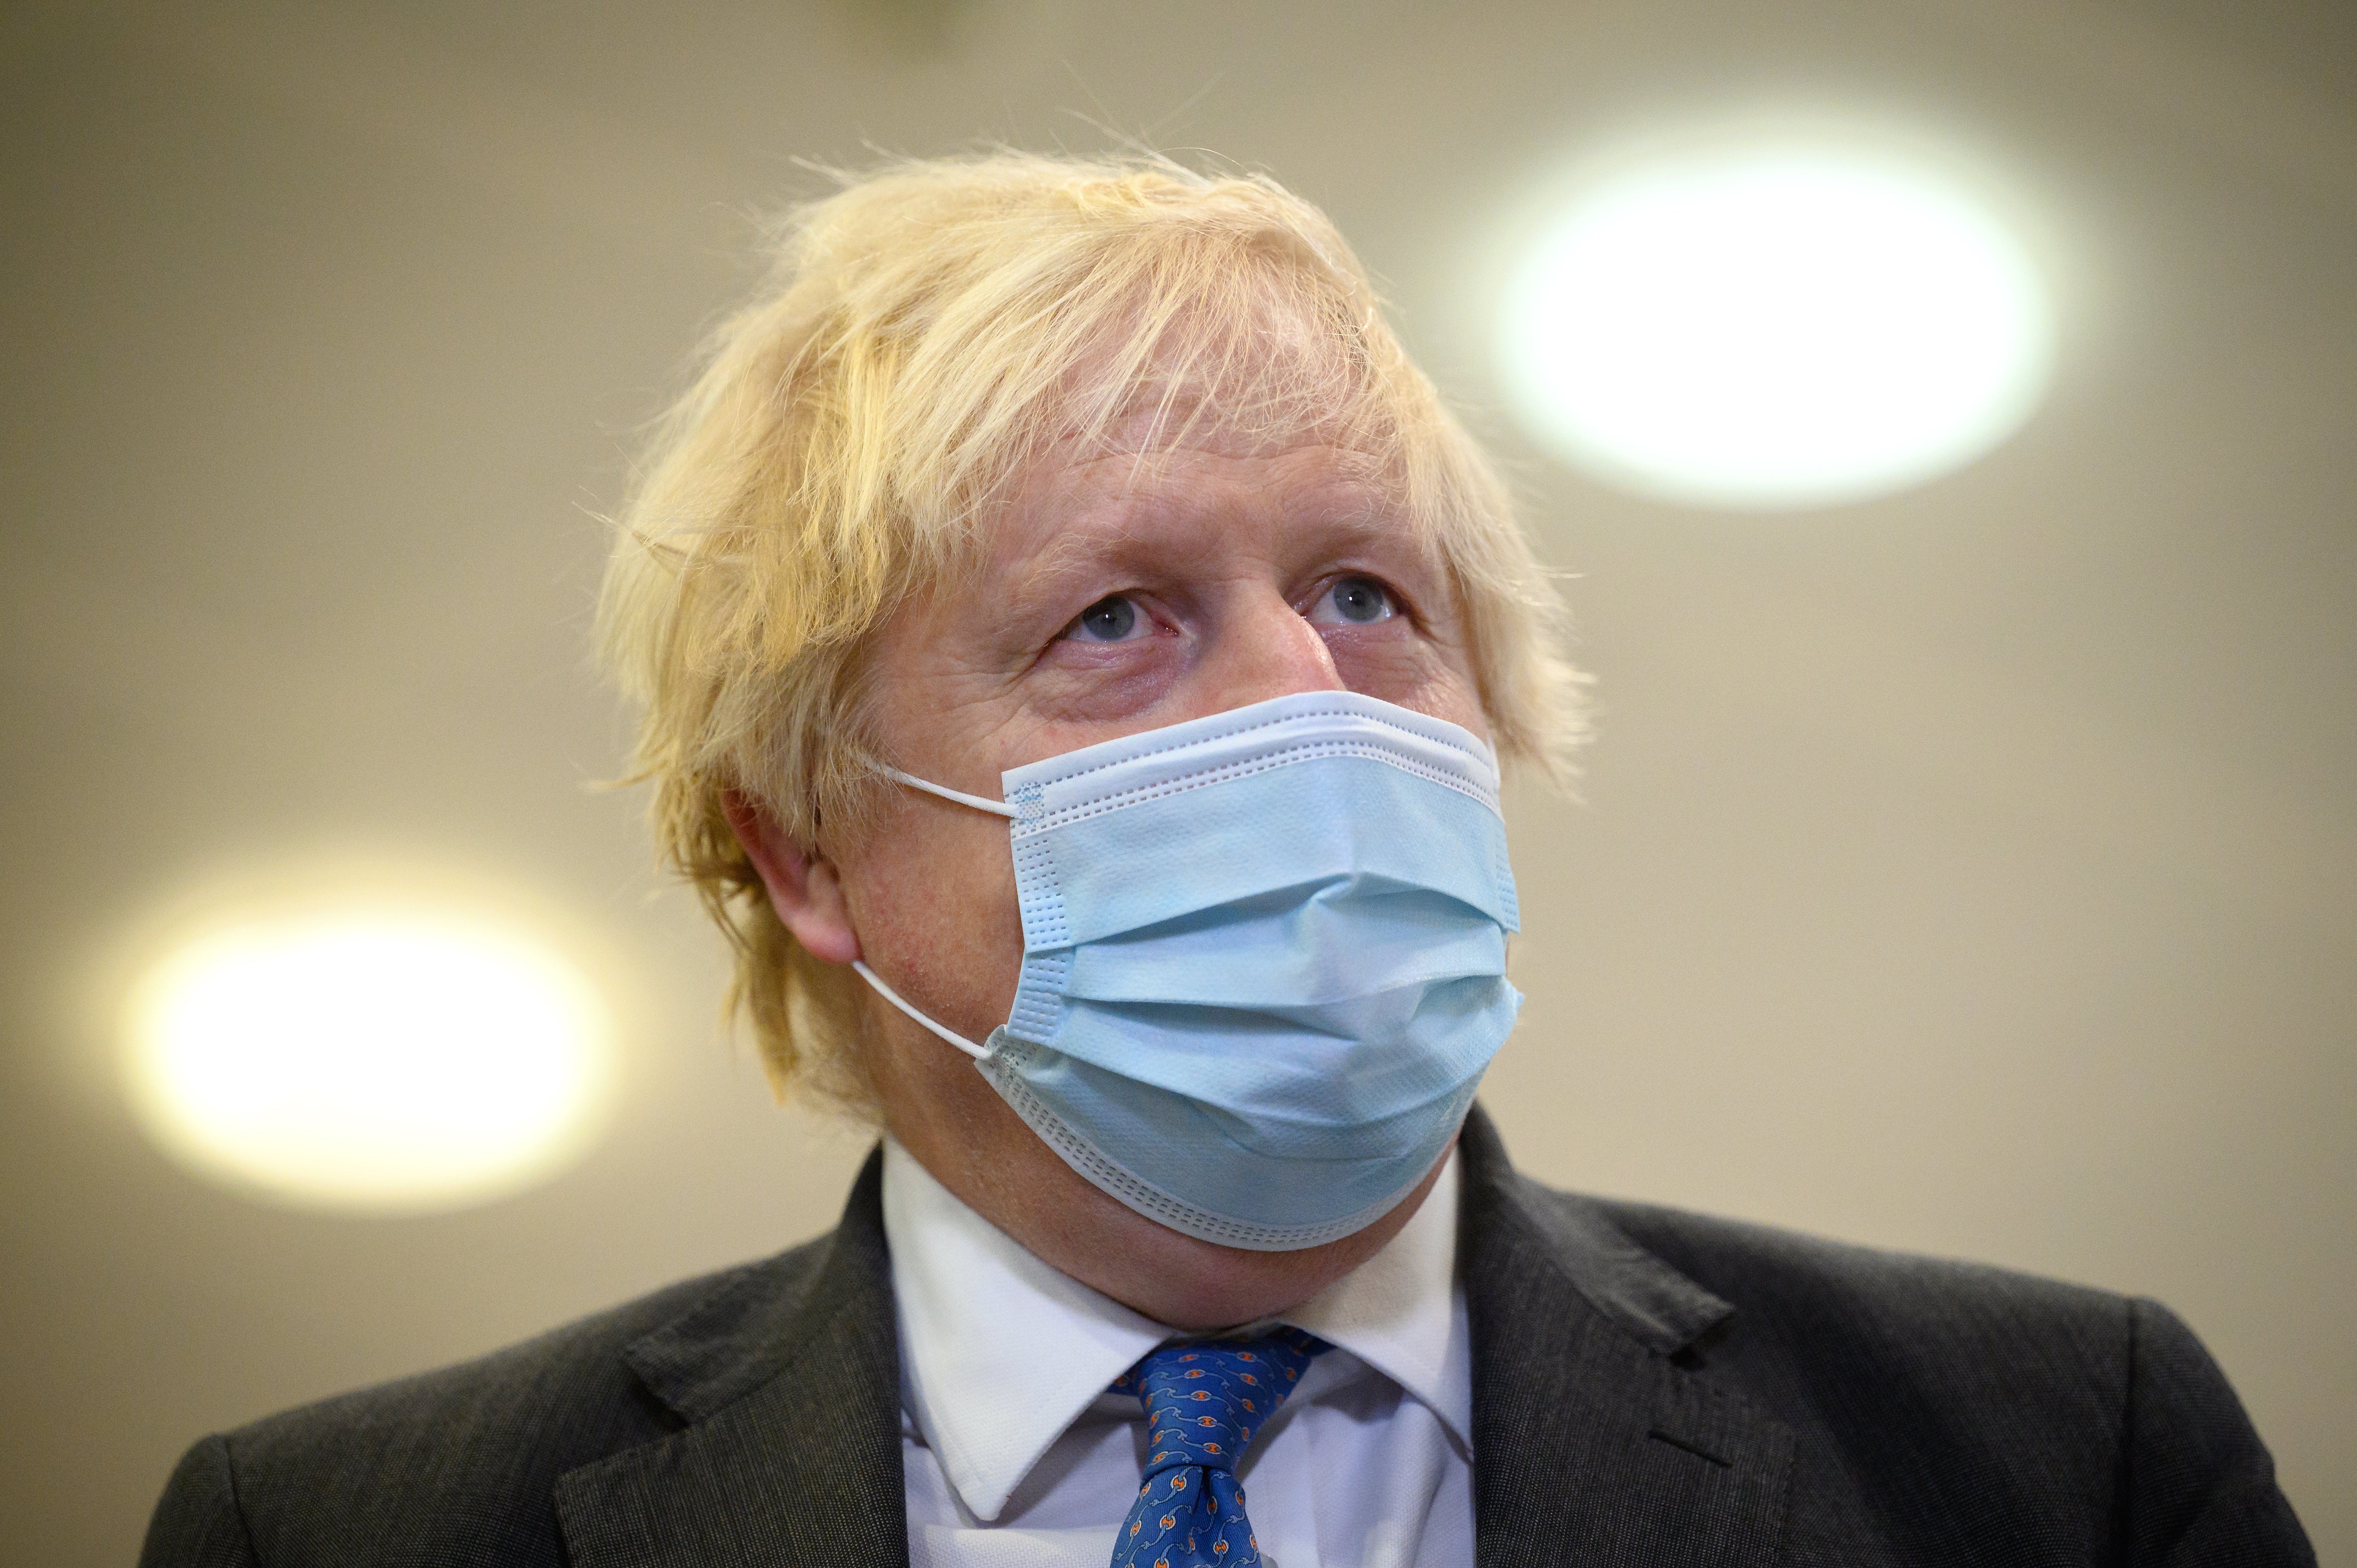 Prime Minister Boris Johnson during a visit to a vaccination centre in Ramsgate, Kent (Leon Neal/PA)